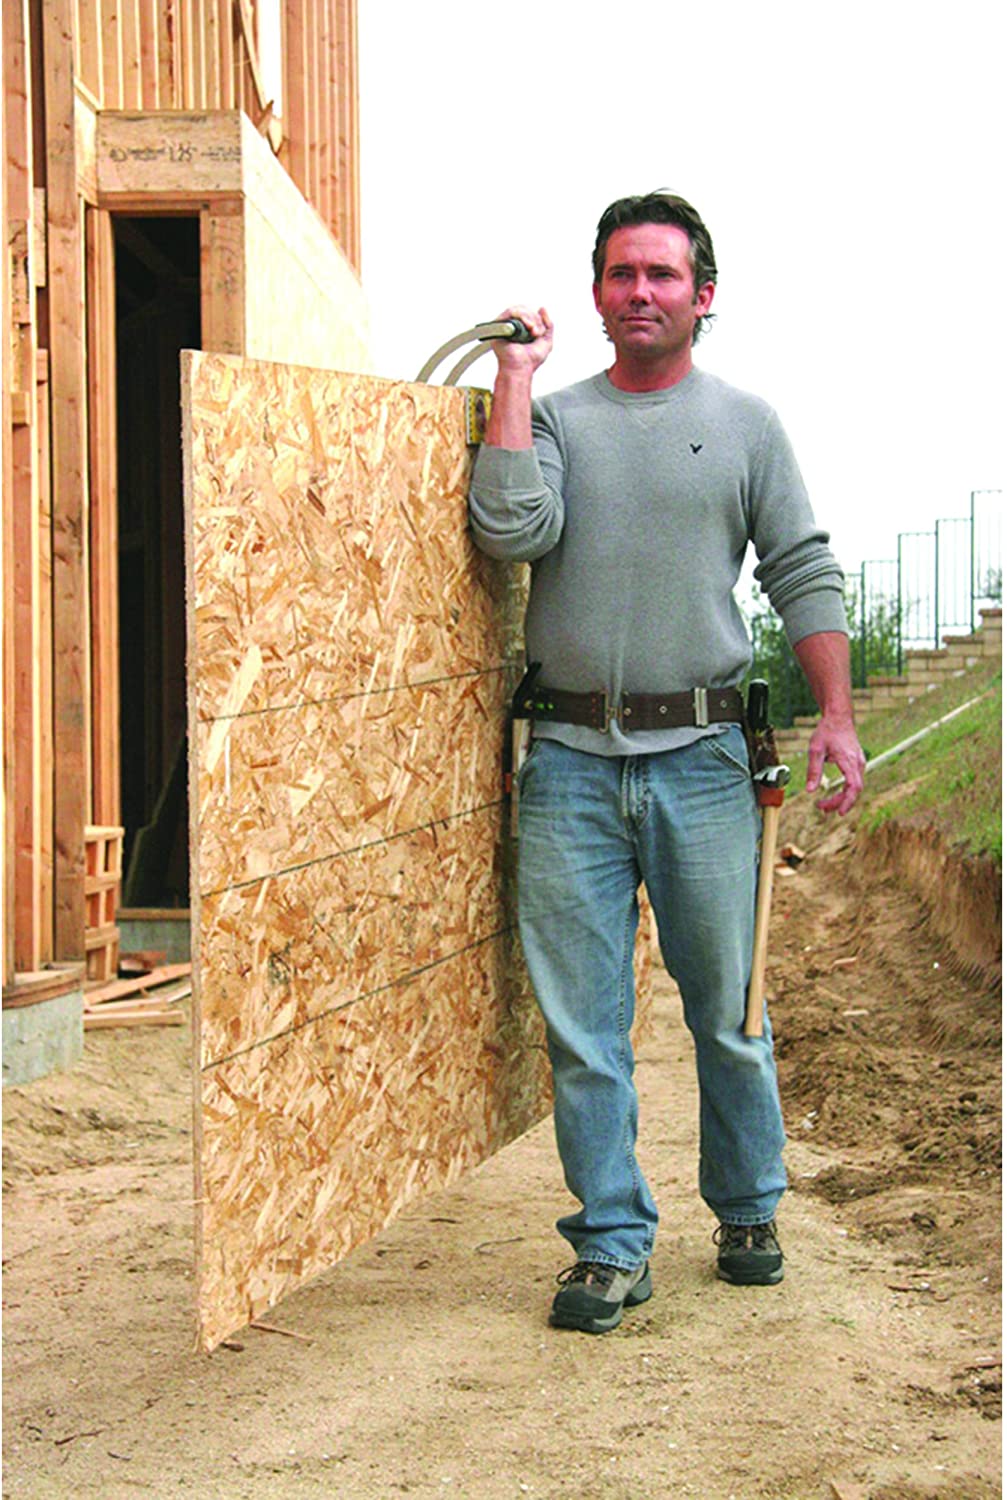 Gorilla Gripper - Clamp lets you easily haul around heavy slabs of wood or drywall by yourself - how to Carry heavy panels with 1 person